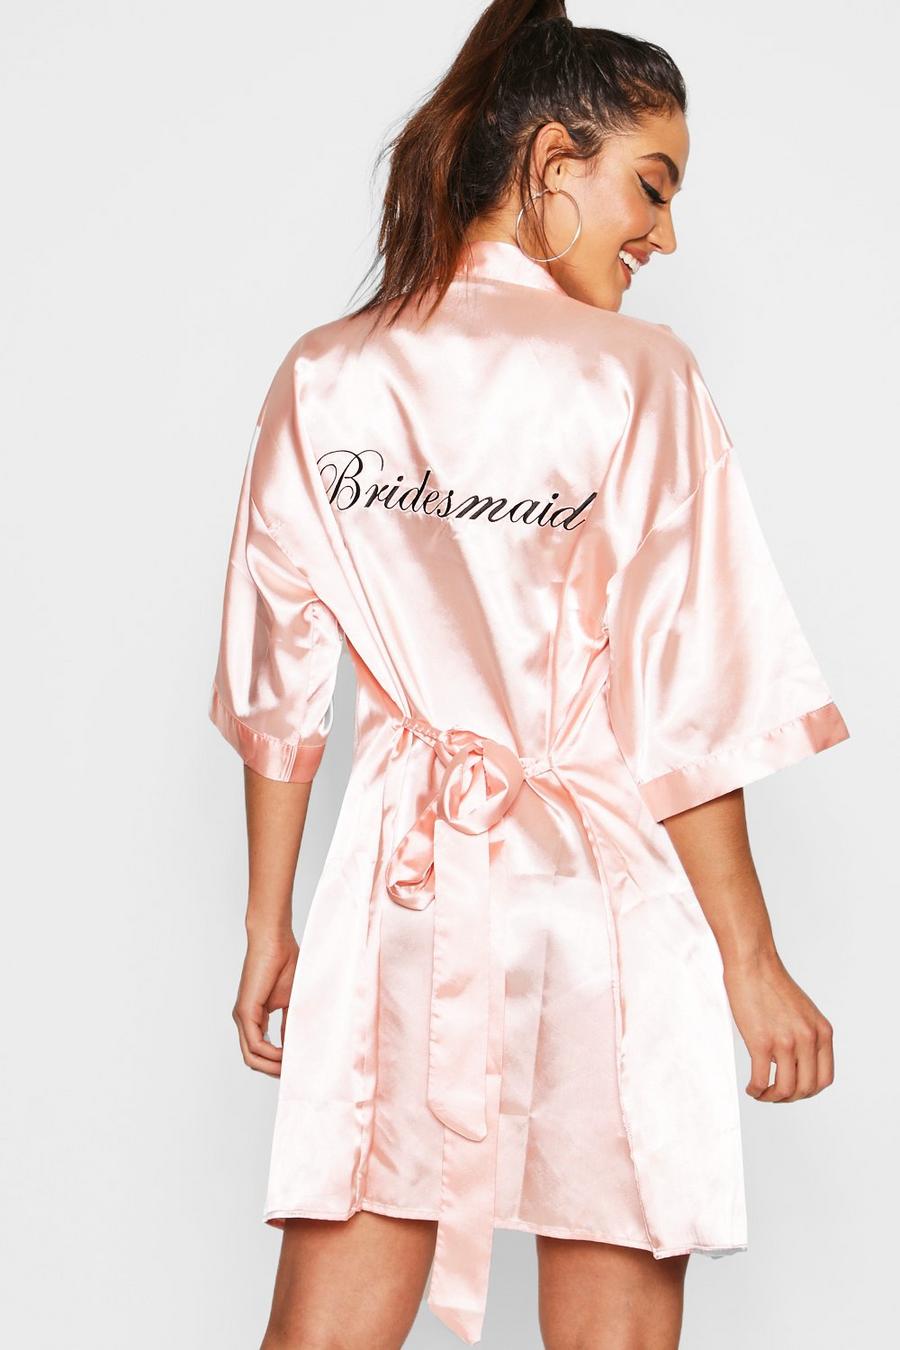 Pink Satin Bridesmaid Robe Short Kimono Robe for Maid of Honor Bachelorette  Party Robes Women Getting Ready Dressing Gown for Bride 